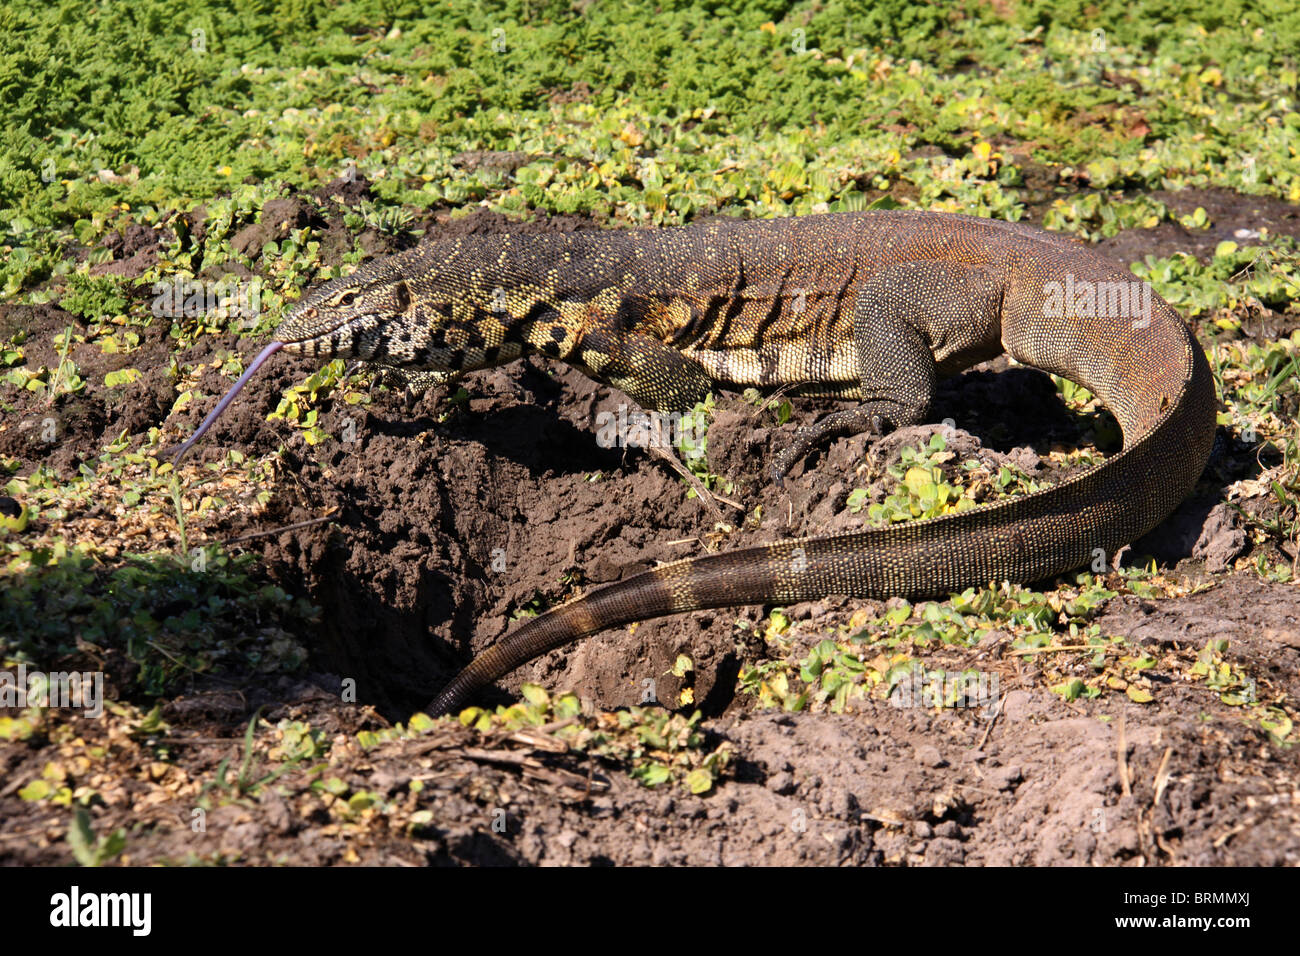 Leguaan or Monitor lizard with its tongue outstretched Stock Photo